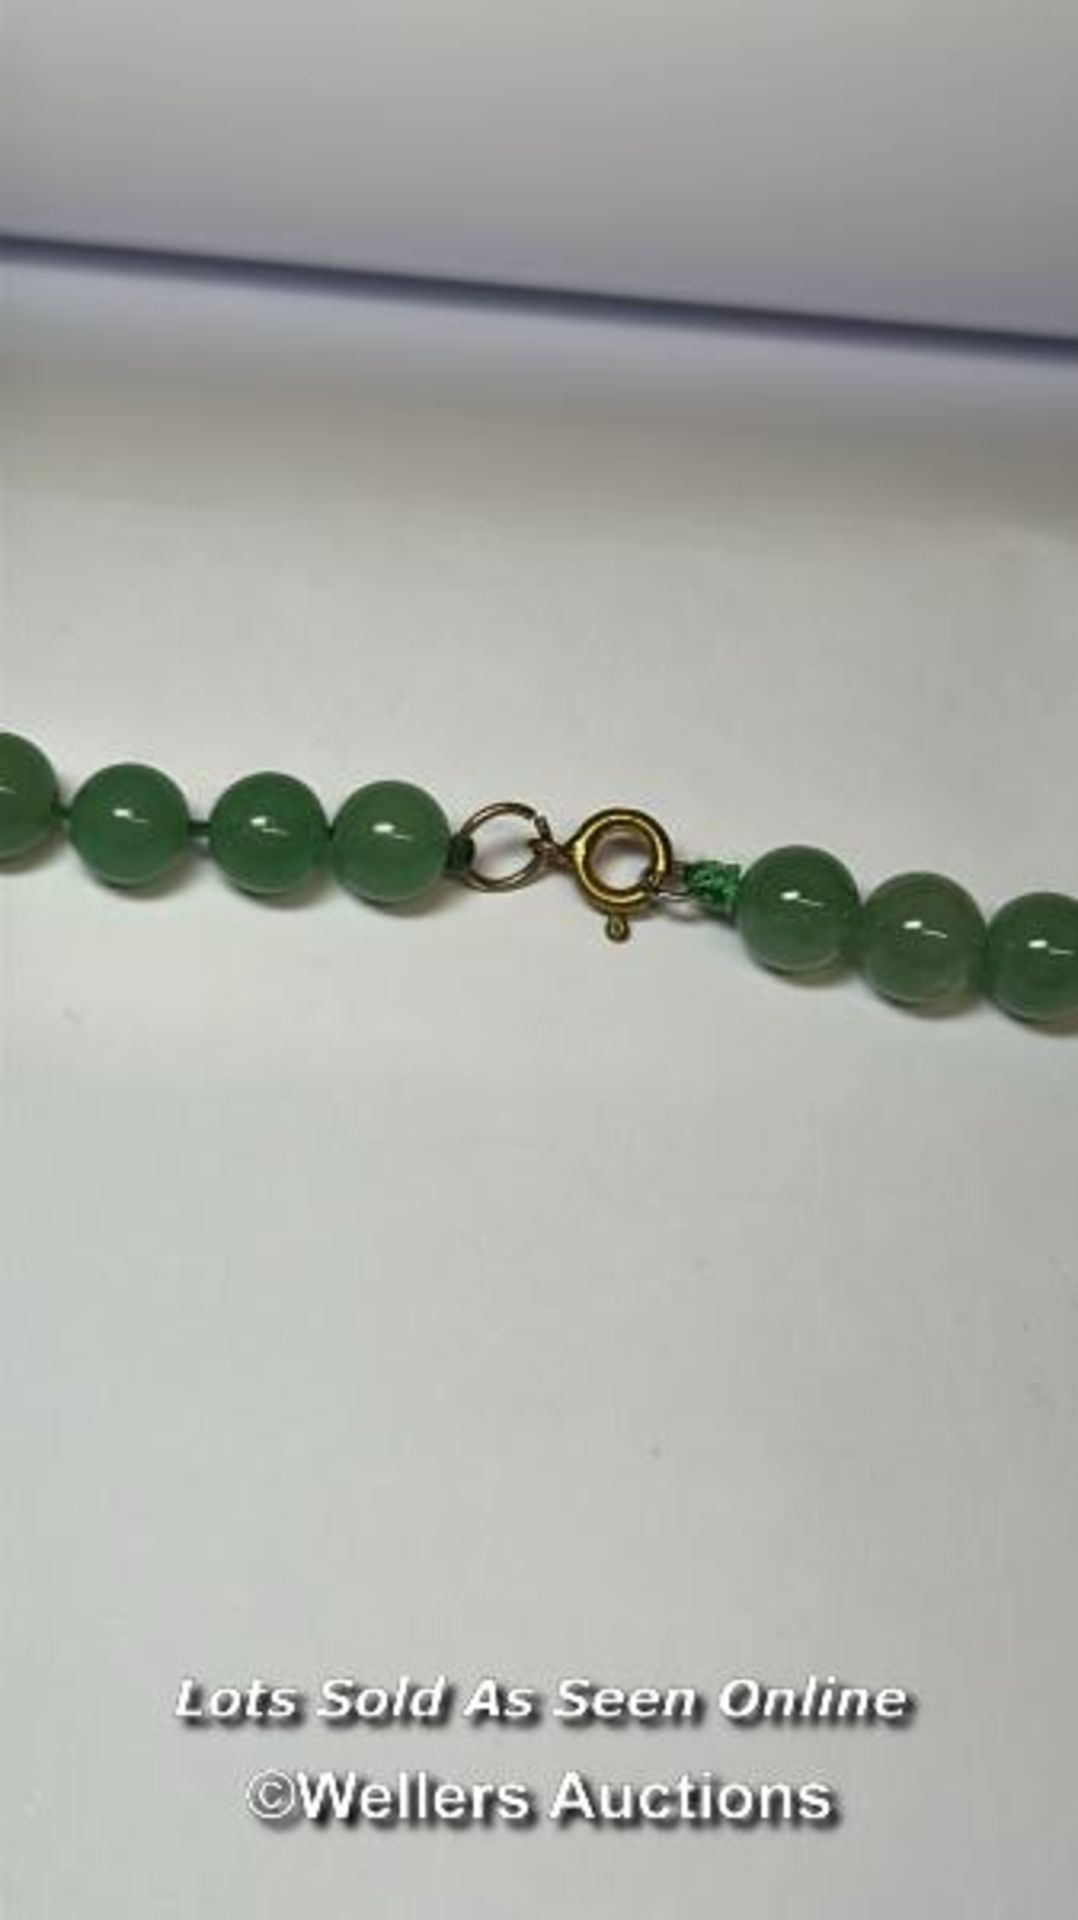 Jade bead necklace, length 60cm, 8-8"2mm beads with base metal bolt ring clasp / SF - Image 2 of 3